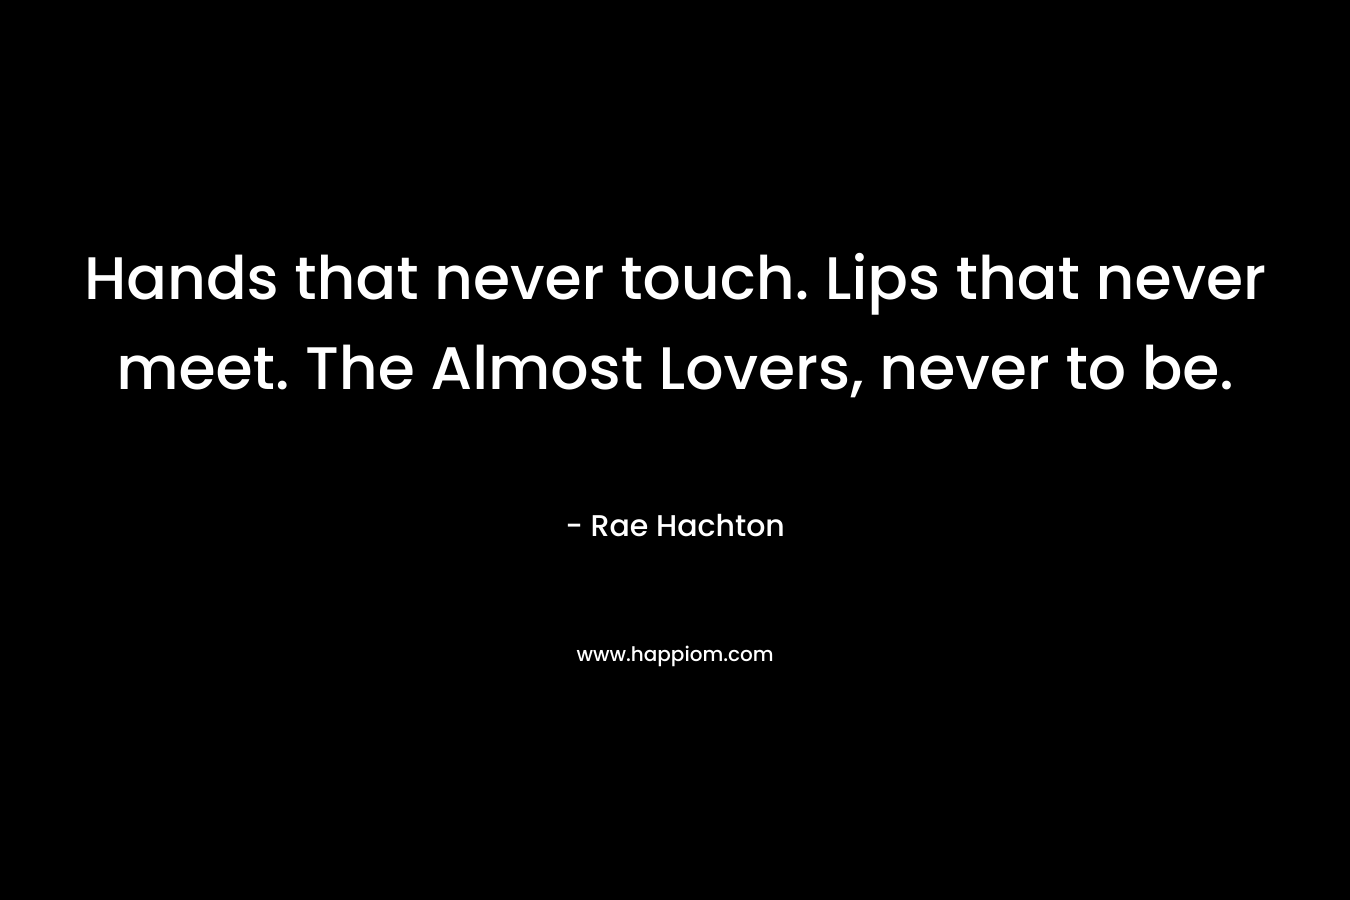 Hands that never touch. Lips that never meet. The Almost Lovers, never to be.